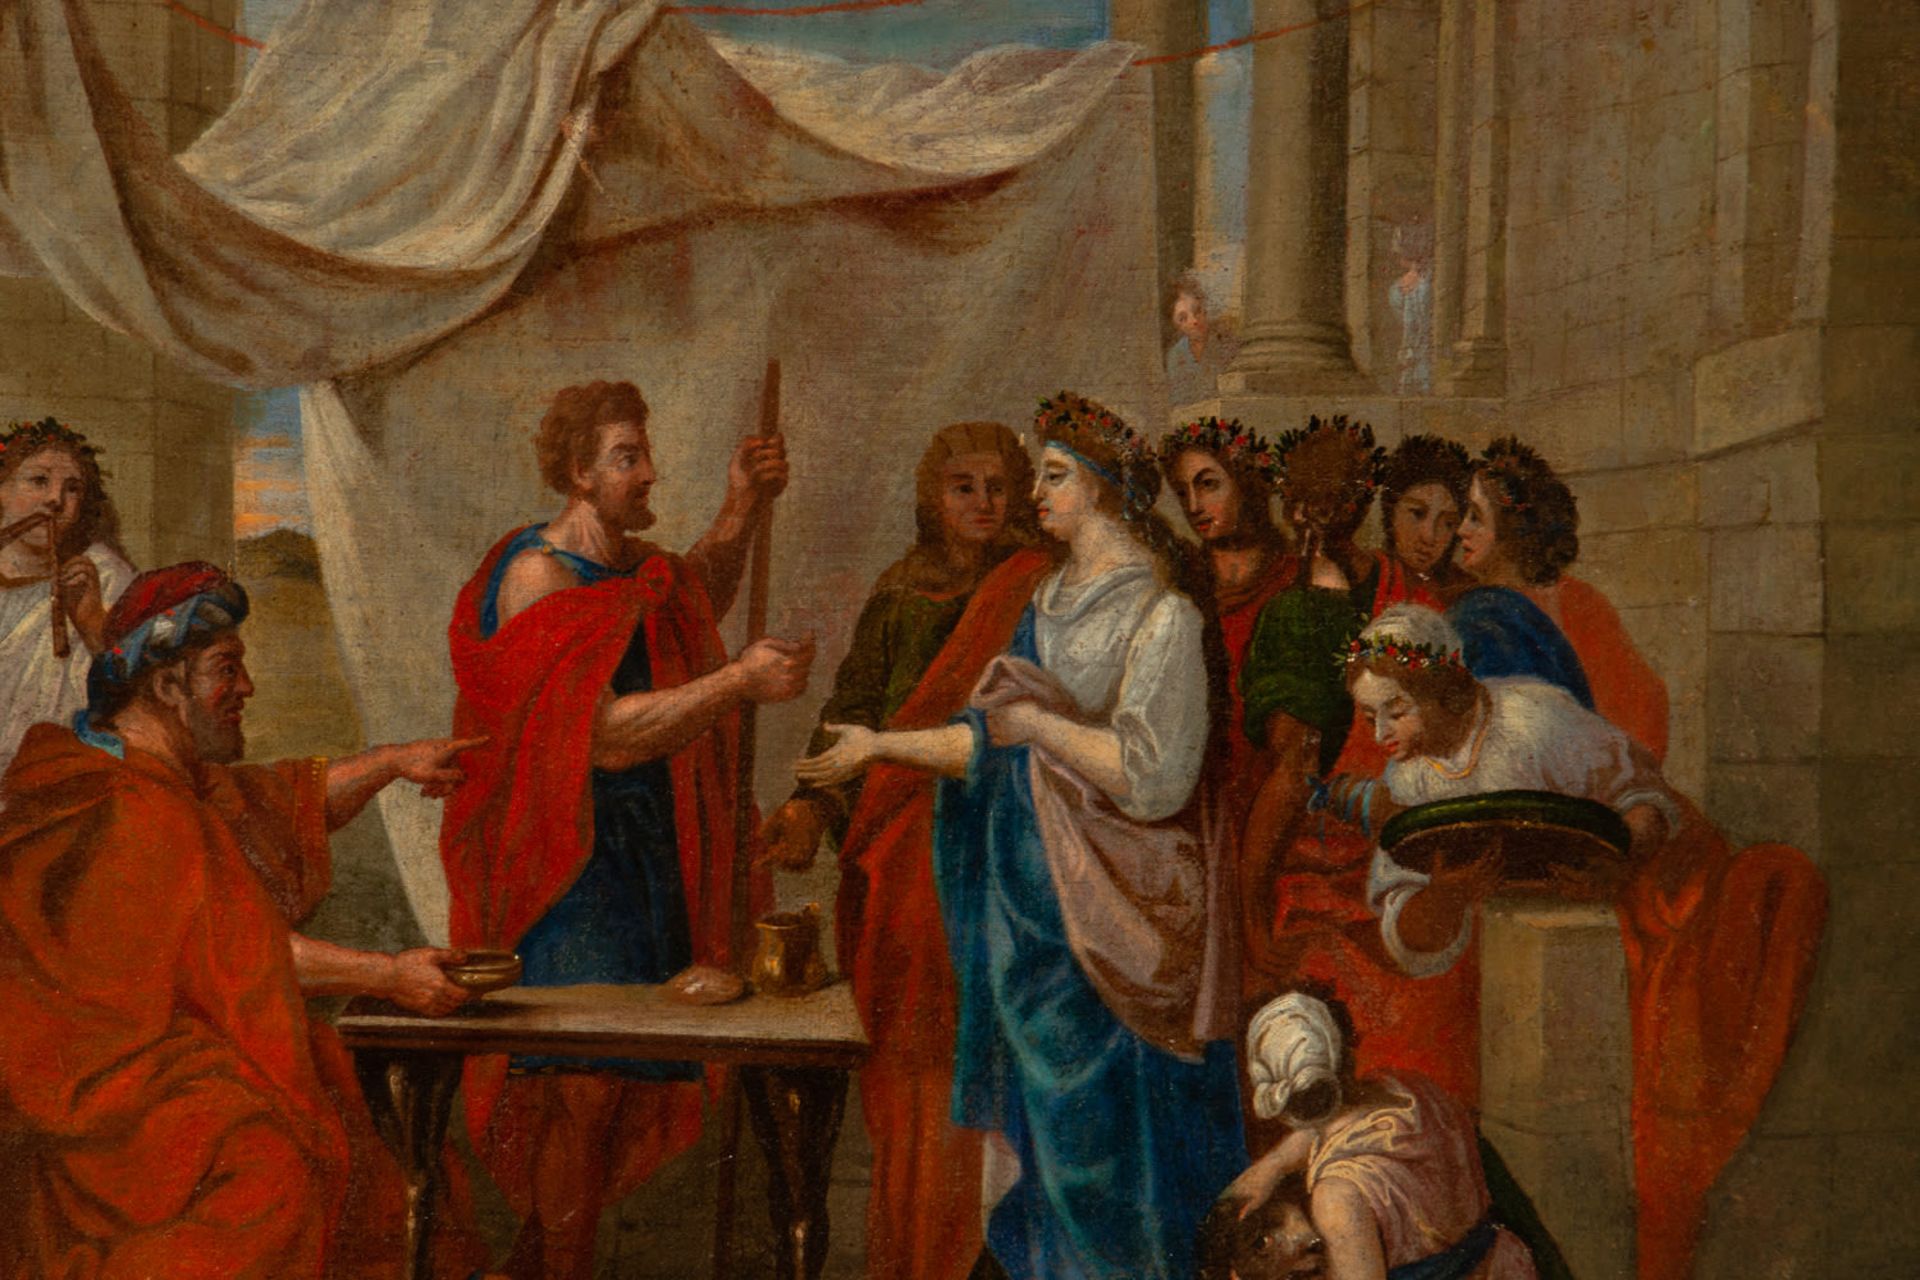 Salome in front of King Herod, 18th century Italian school - Image 4 of 5